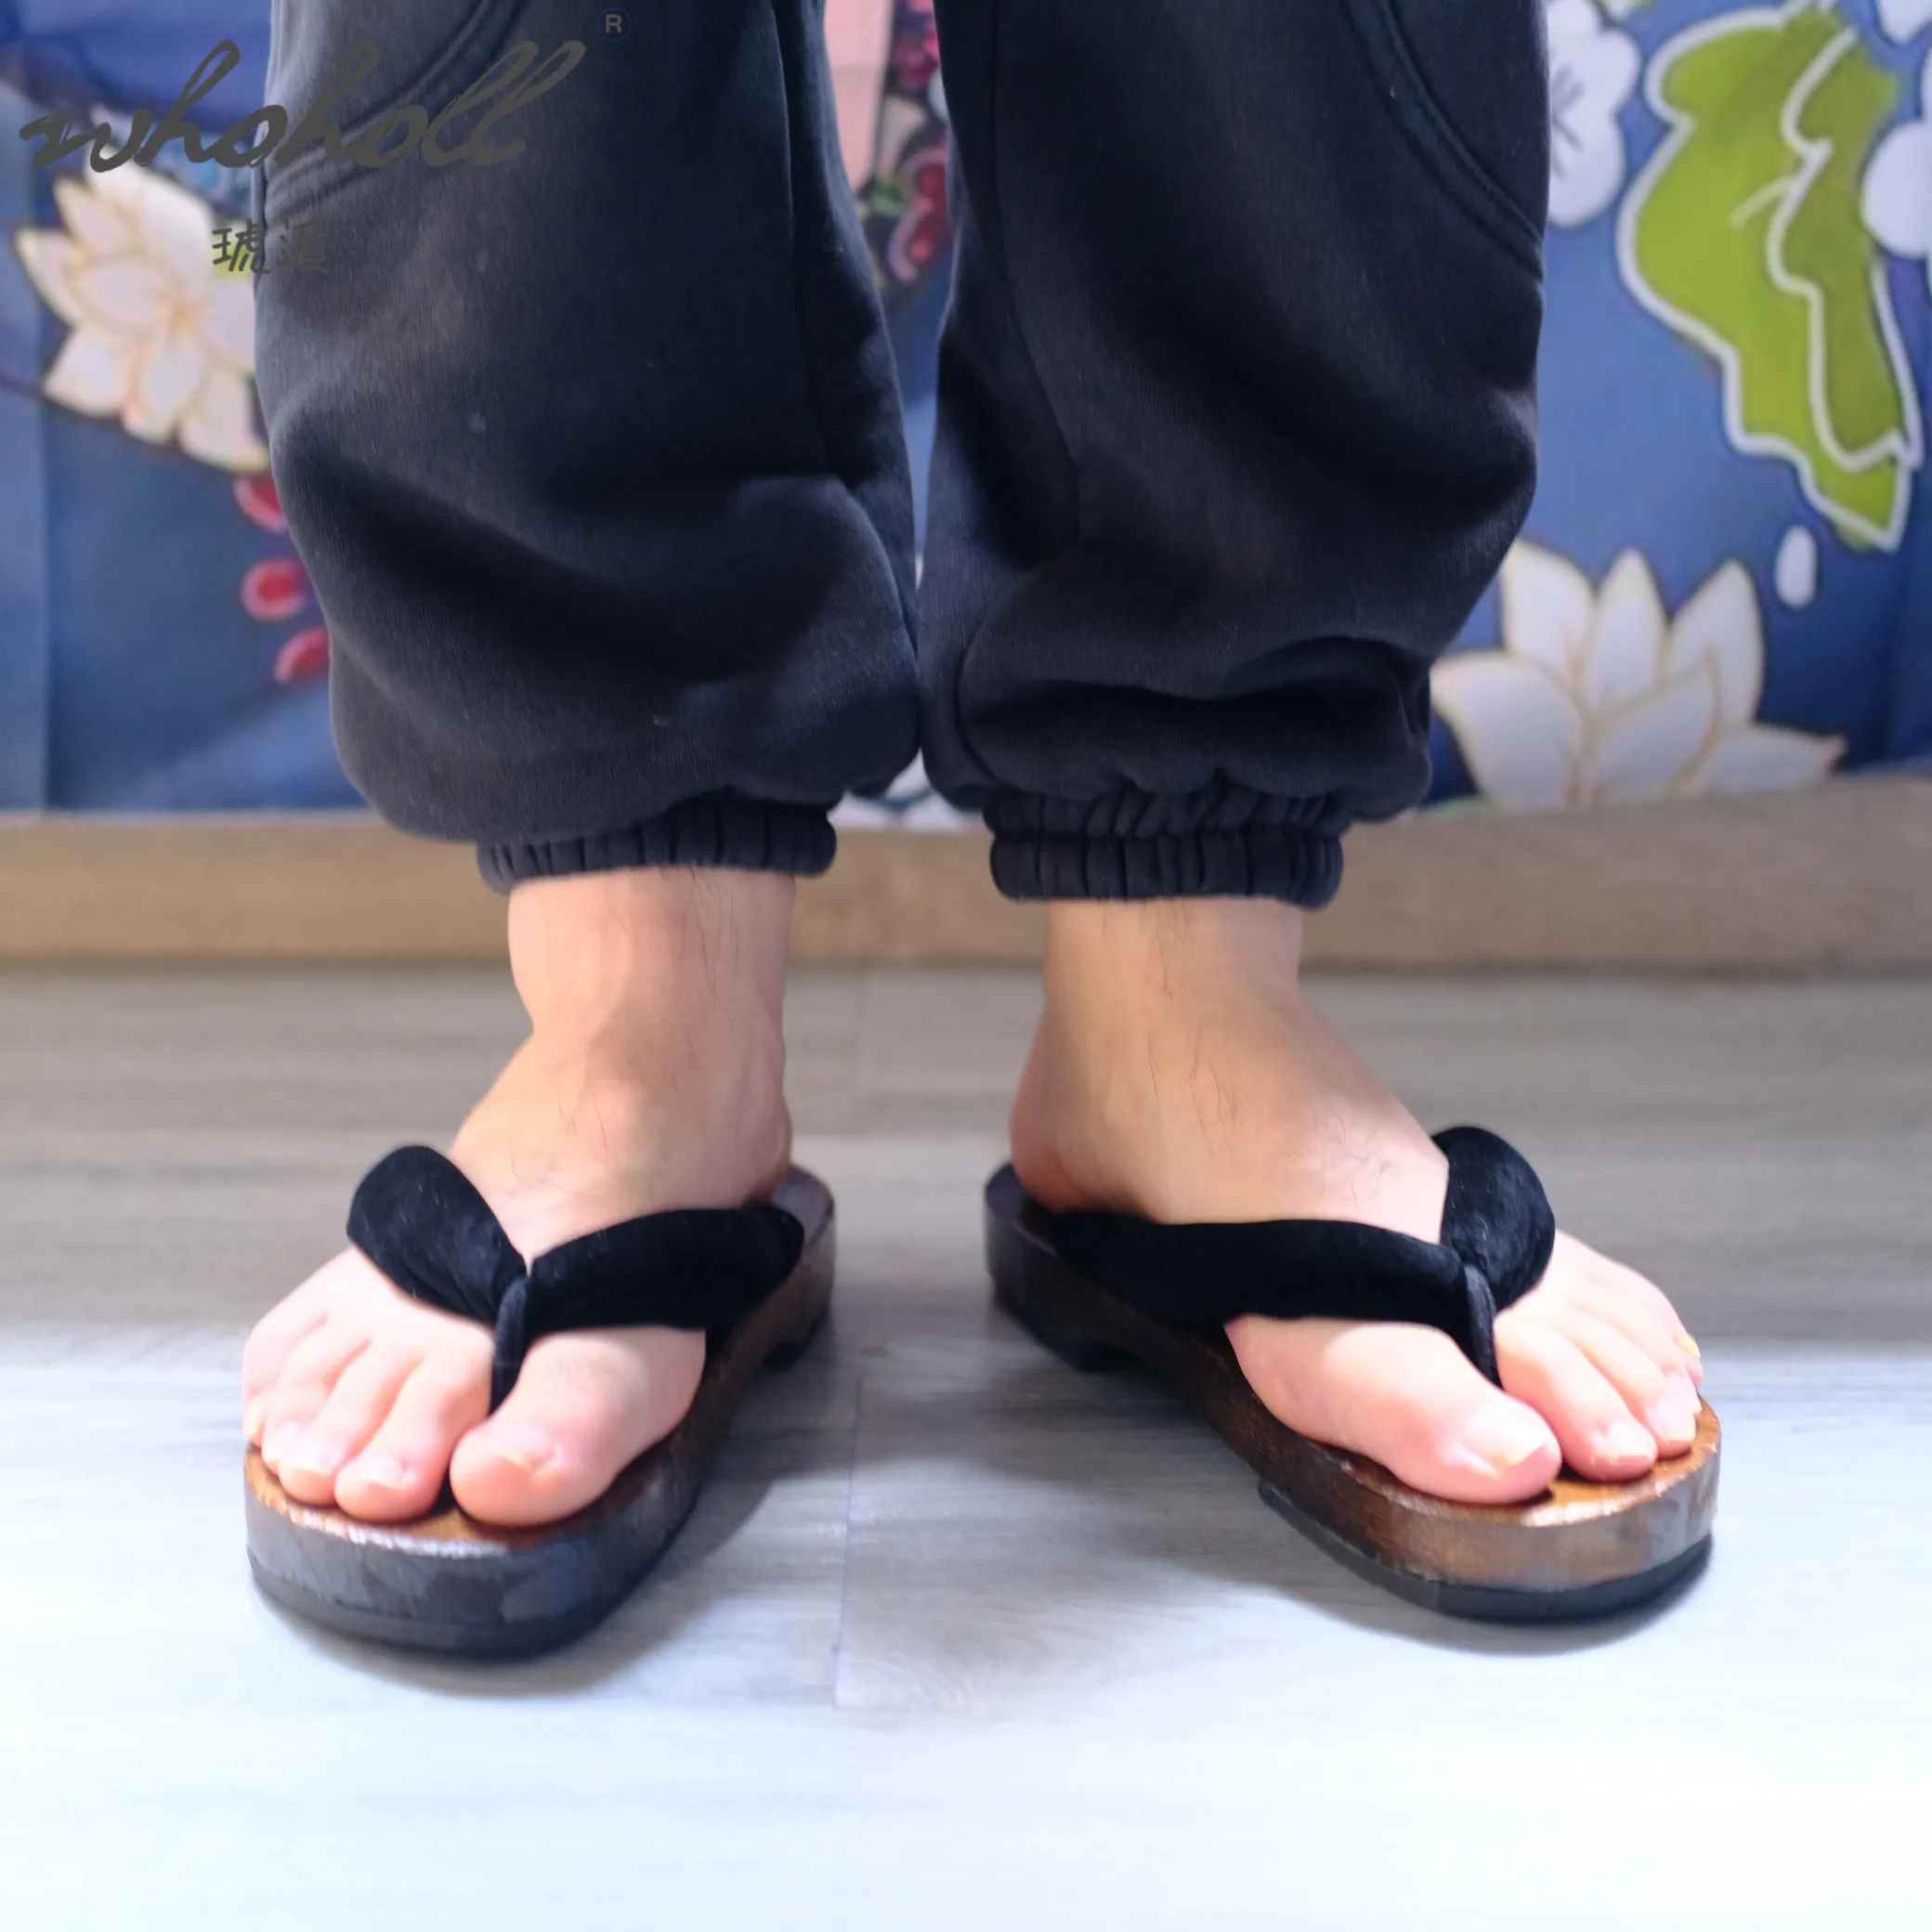 Man Women Slippers Japanese Geta Flip Flops Cos Demon Slayer Wood Thick Sole Coplay Shoes Slippers Japanese Clogs Sandals images - 6